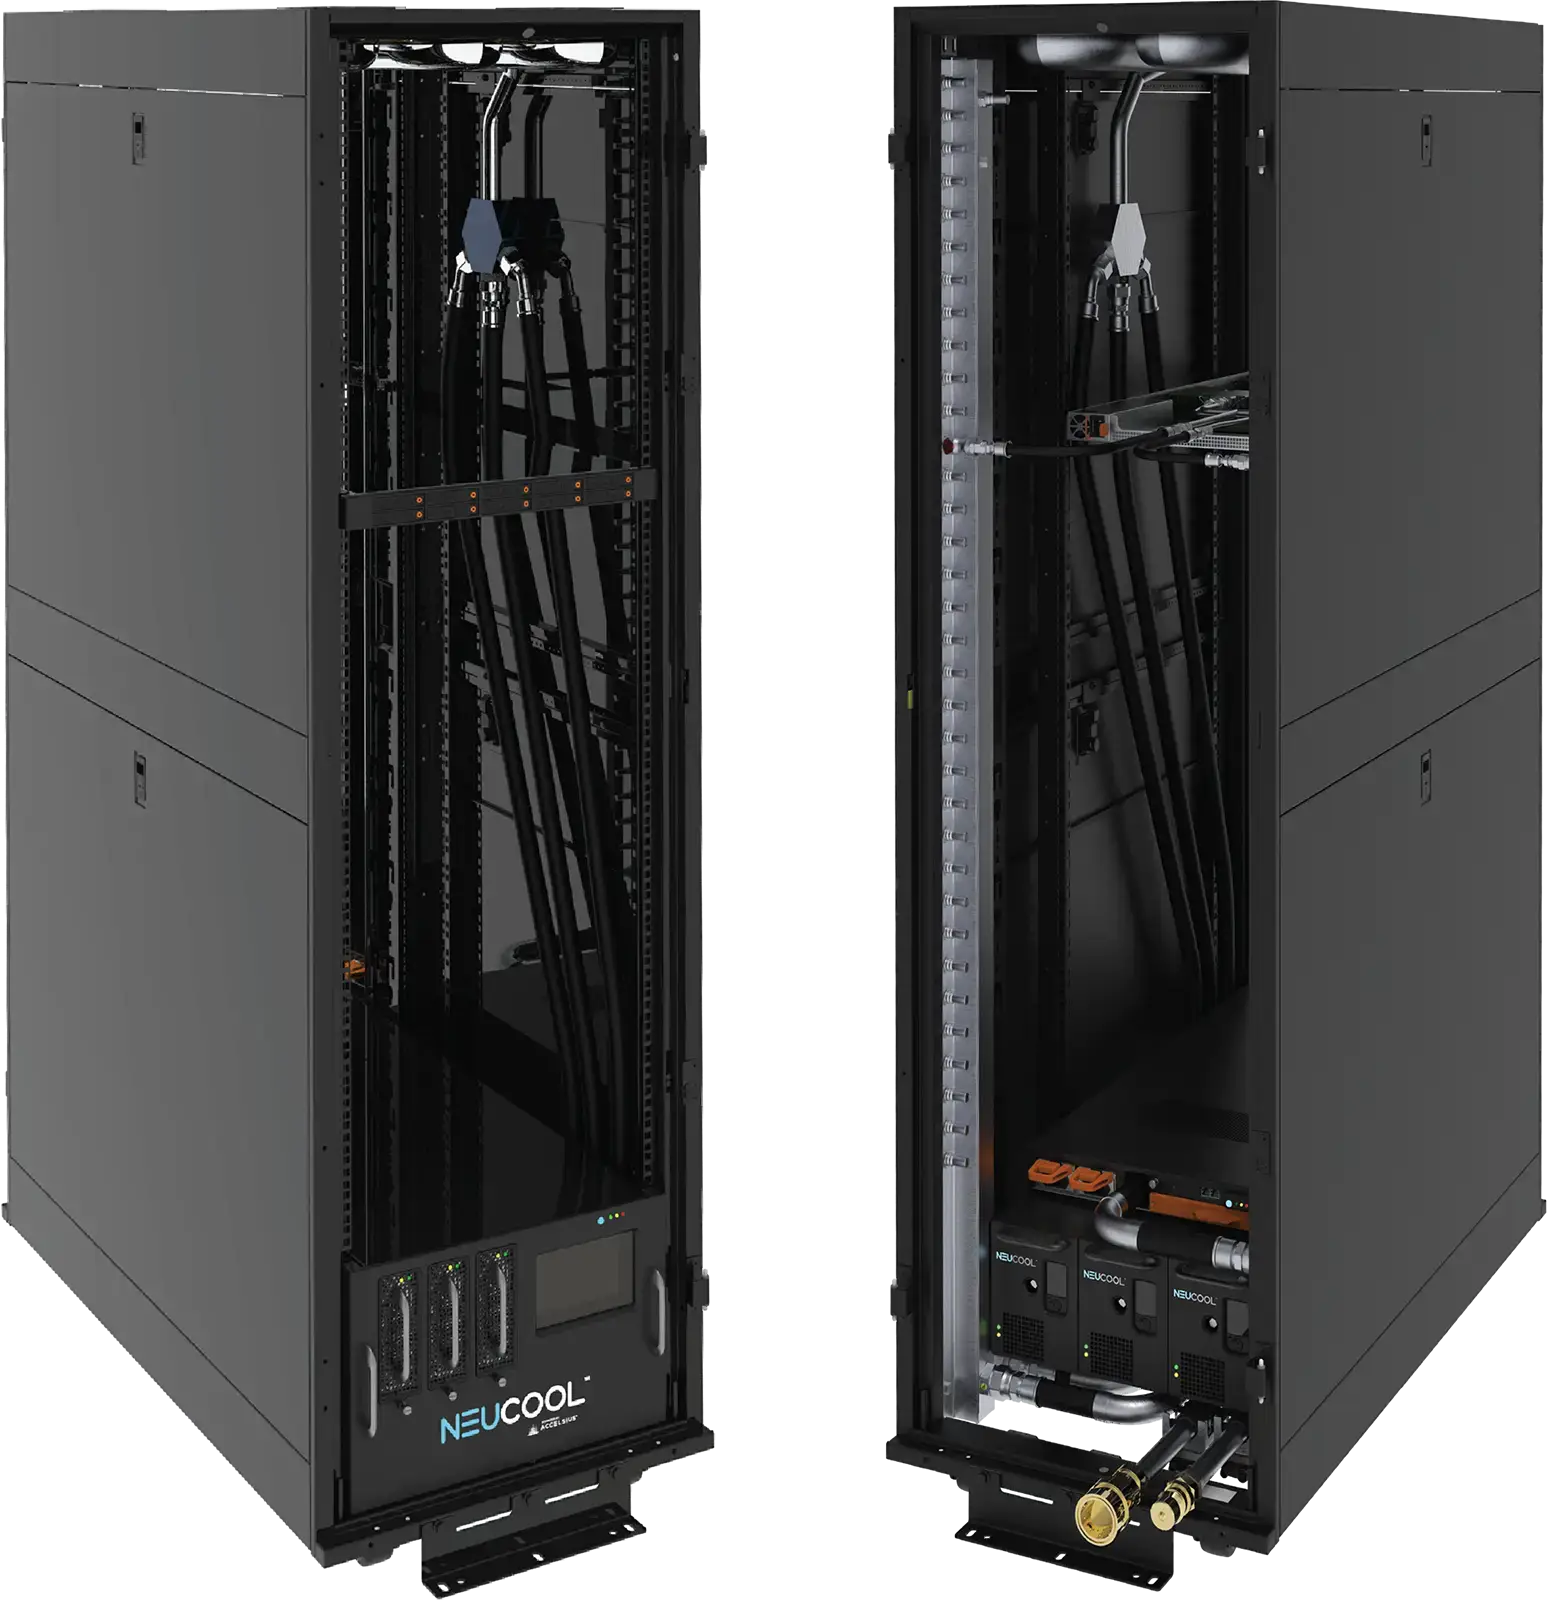 NeuCool in two racks, front and rear views